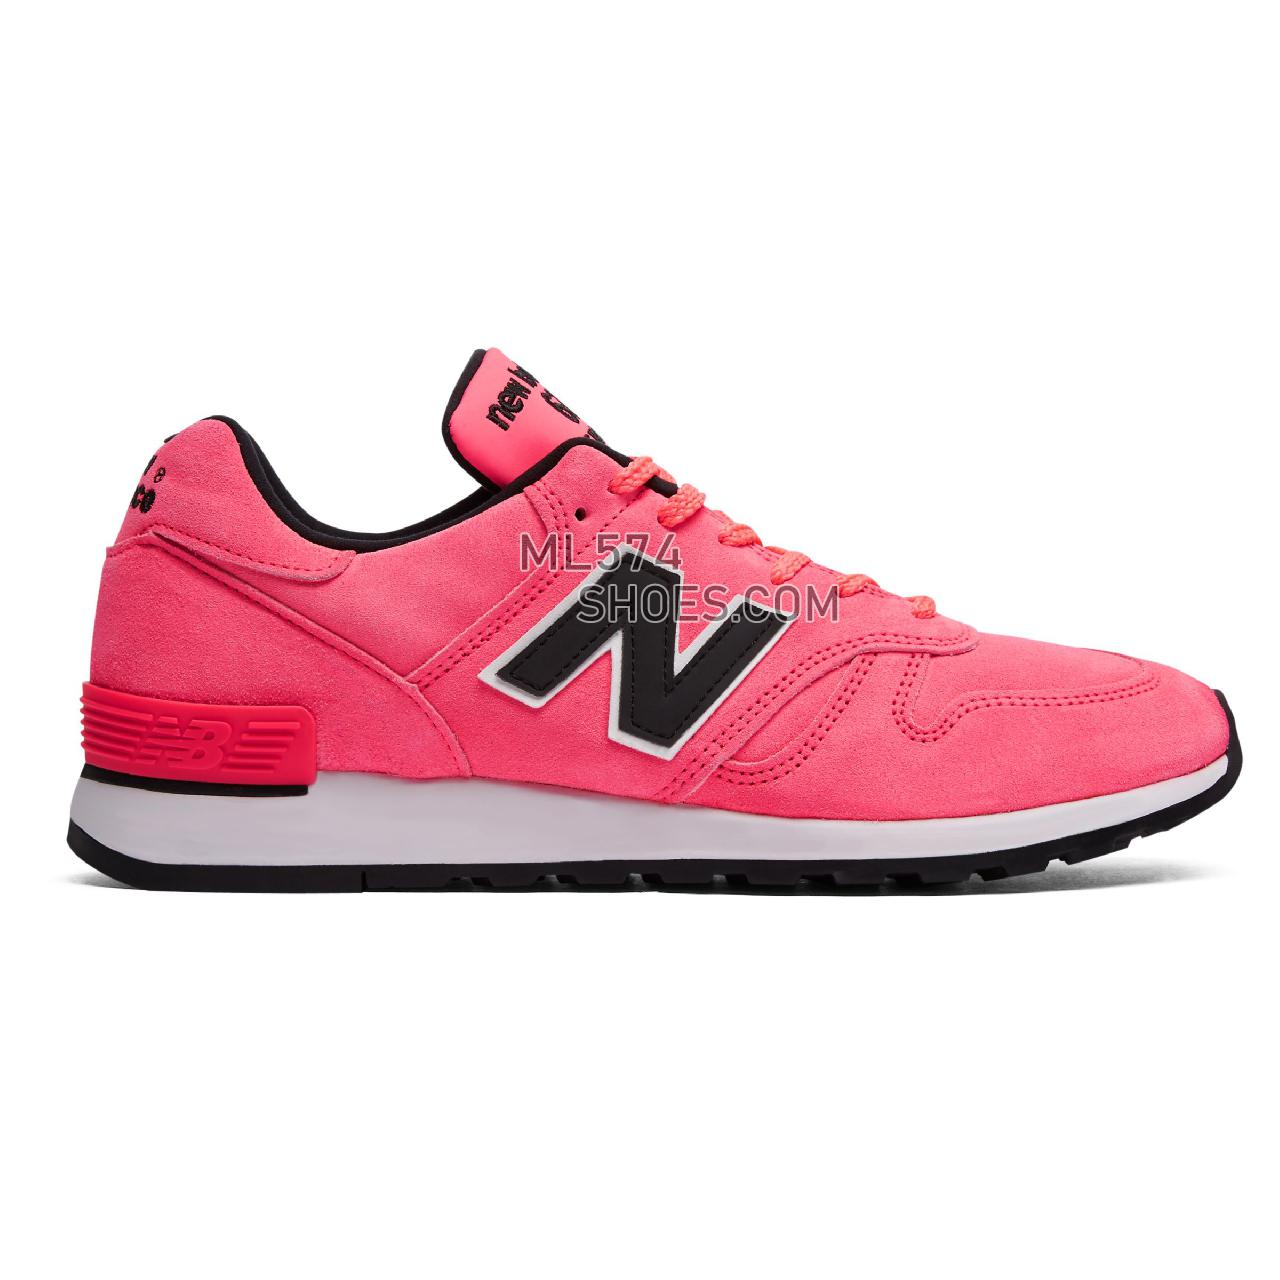 New Balance Made in UK 670 - Men's Made in UK 670 Classic - Pink with Black and White - M670NEN